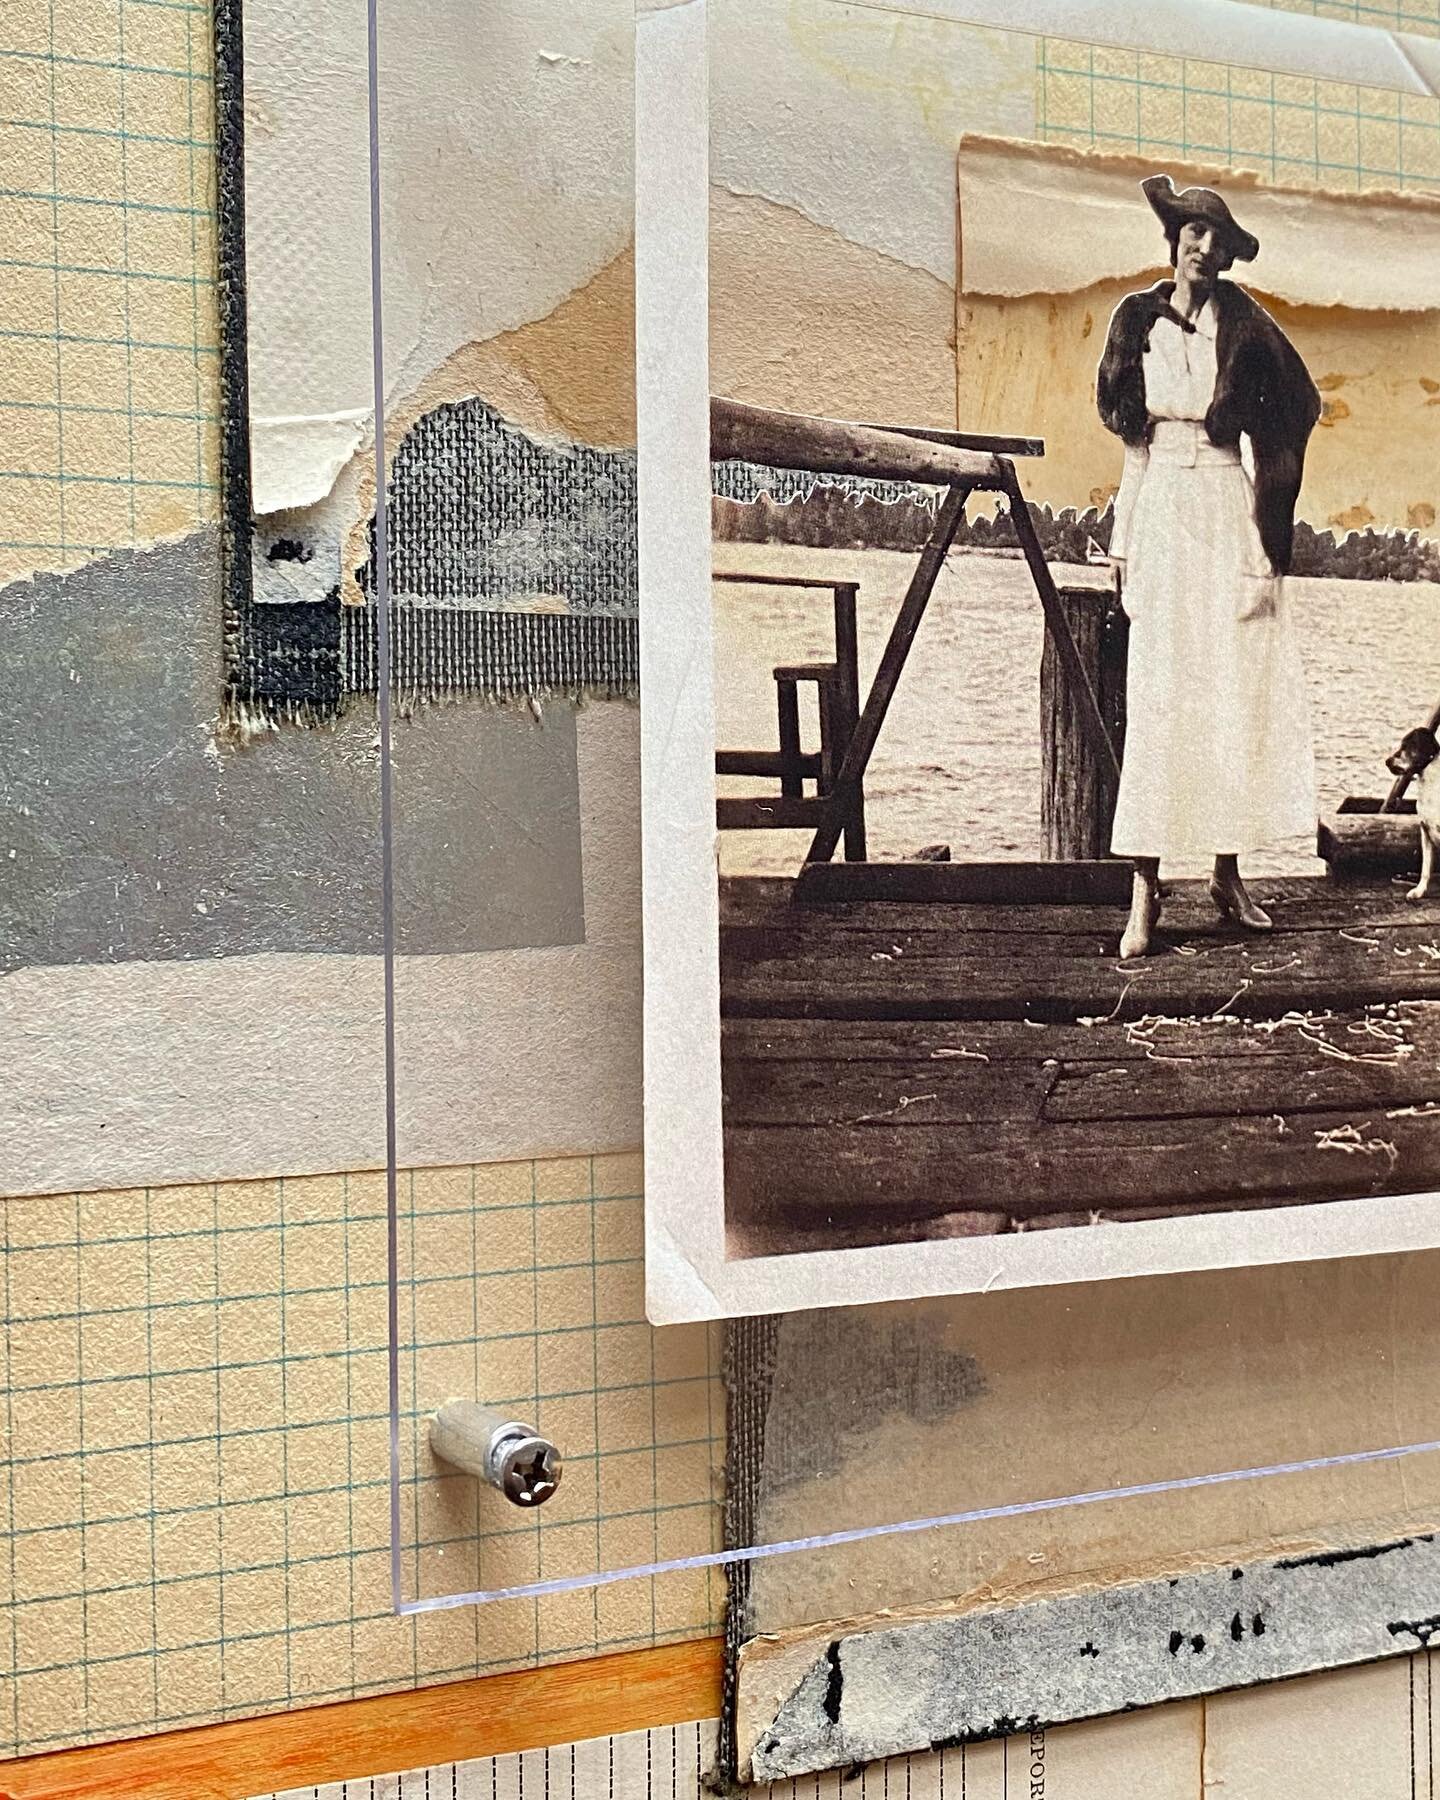 &hellip;details. And final piece, glued and screwed.
#mixedmedia #collage #foundphoto